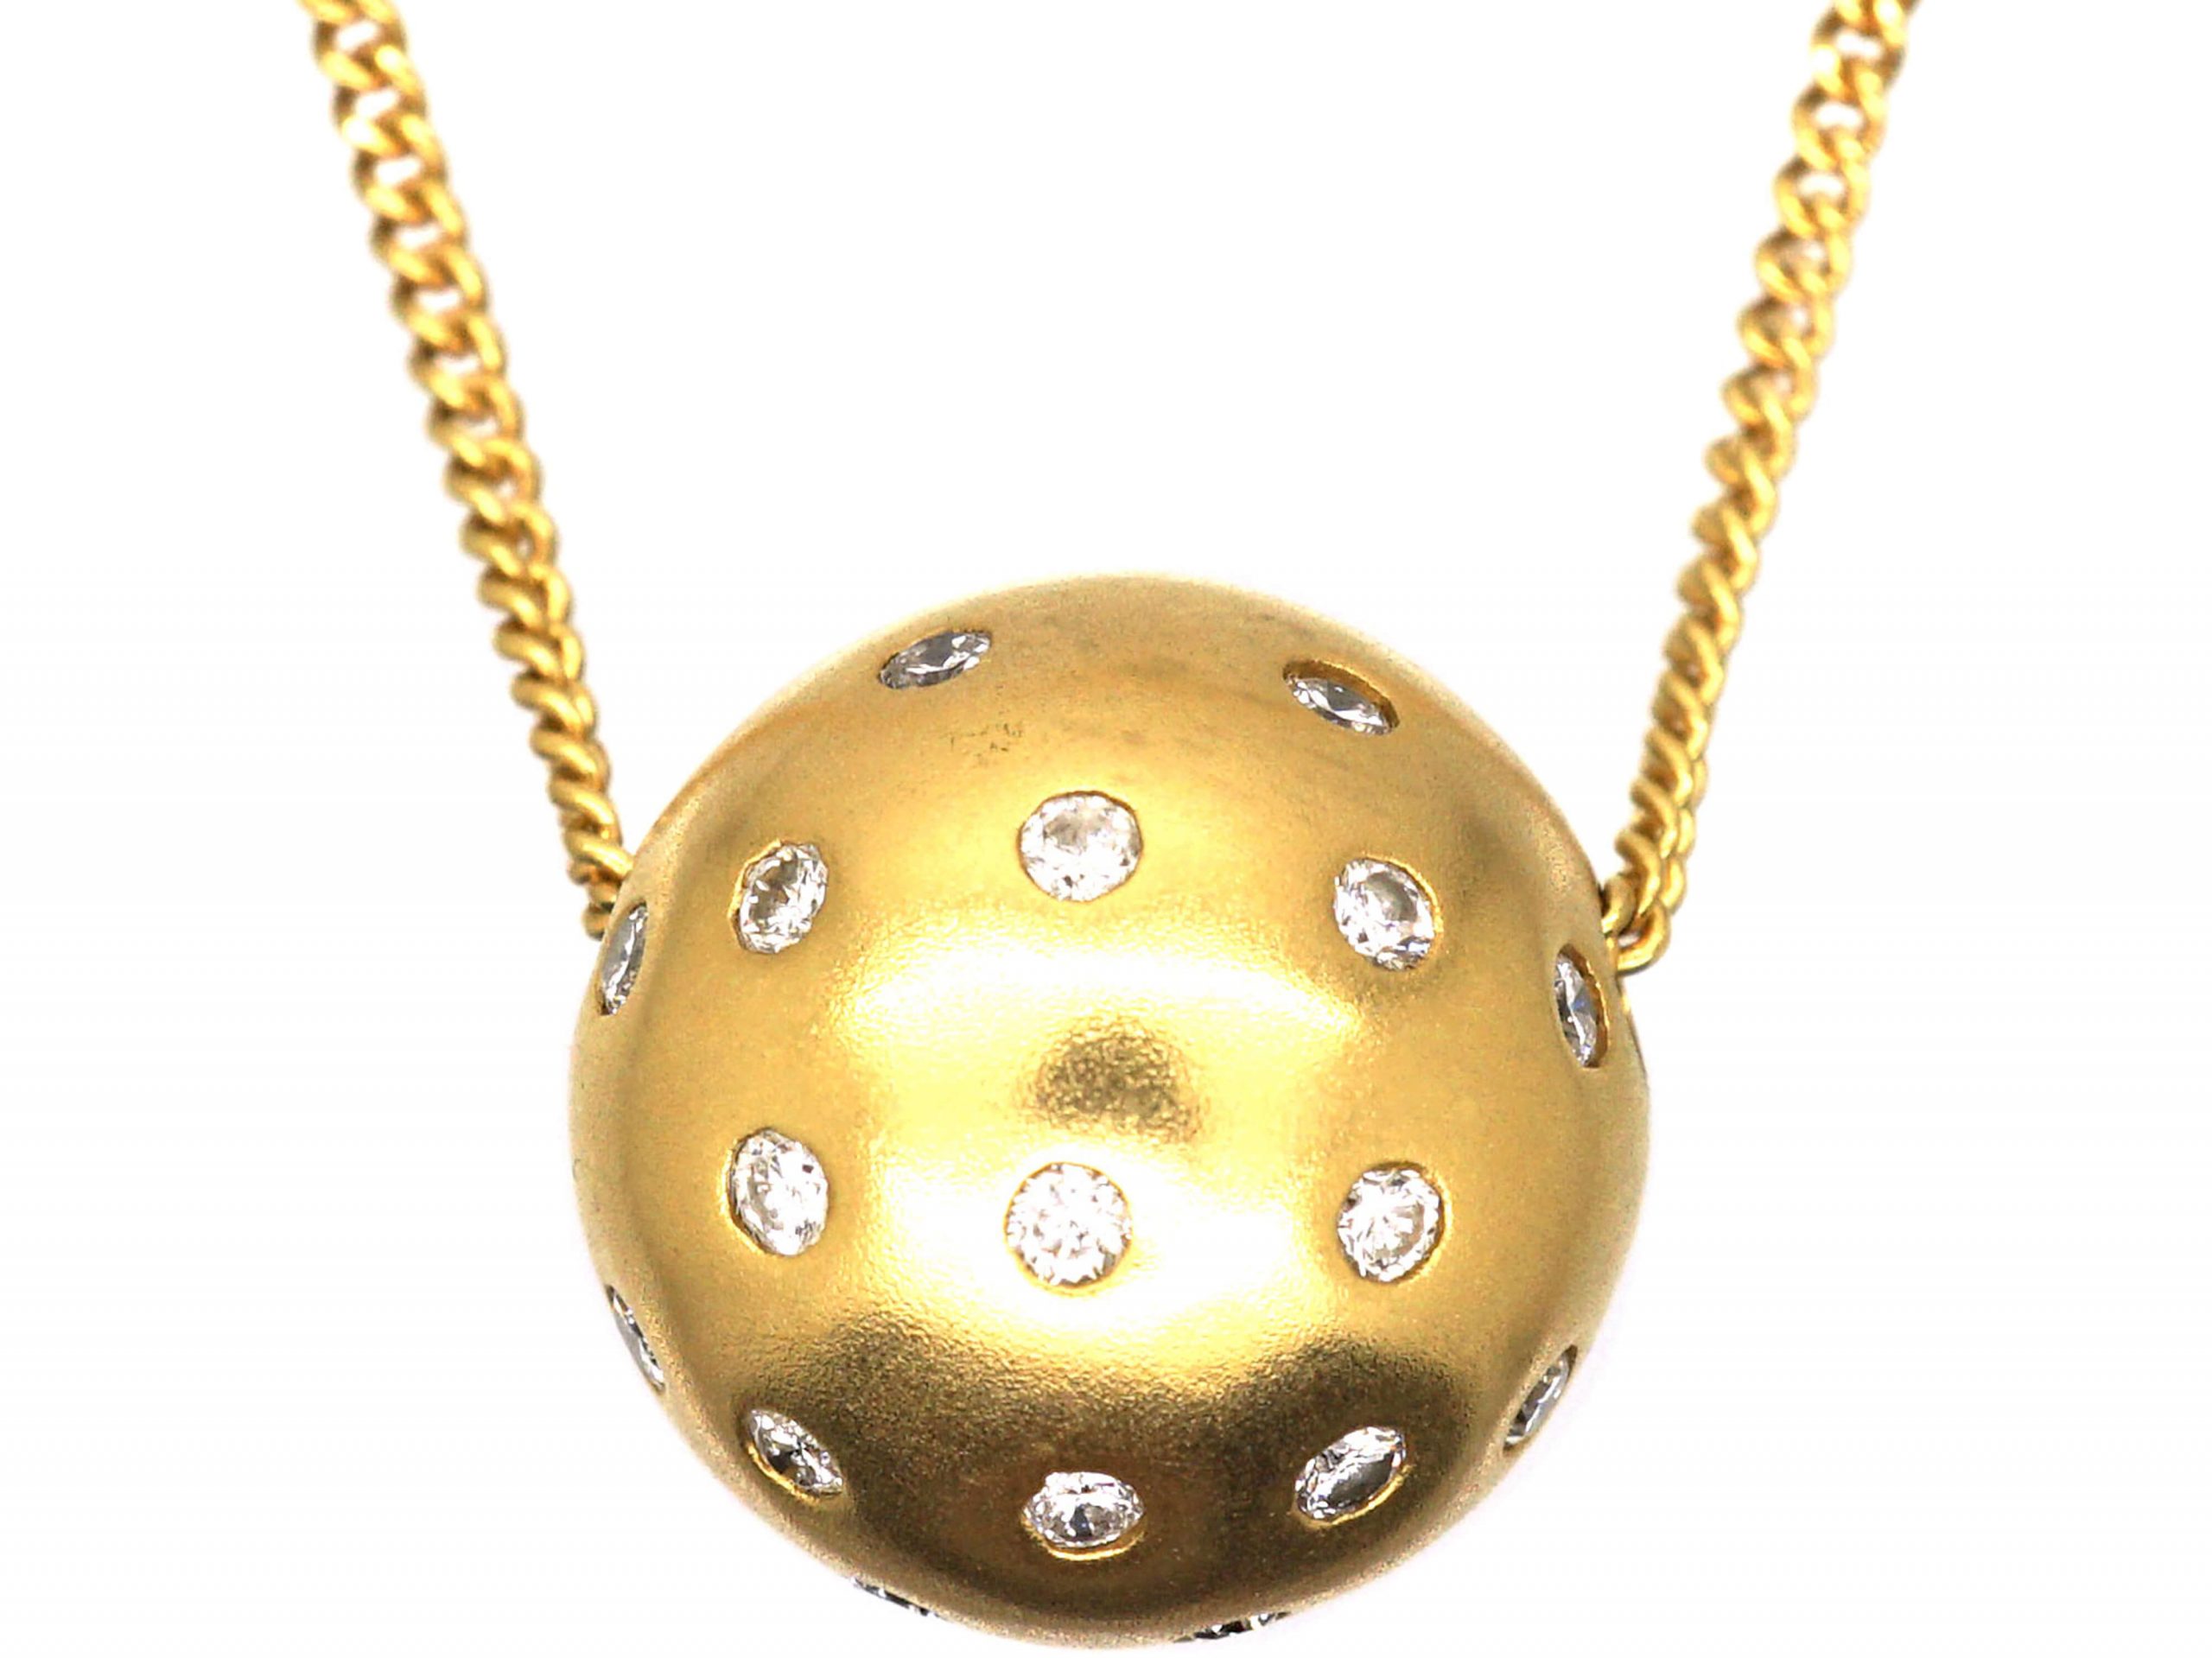 9ct Gold Engravable Round Pendant On Chain 16 20 Inches Chain - Beautiful Bespoke & Affordable Jewellery - Environmentally Conscious